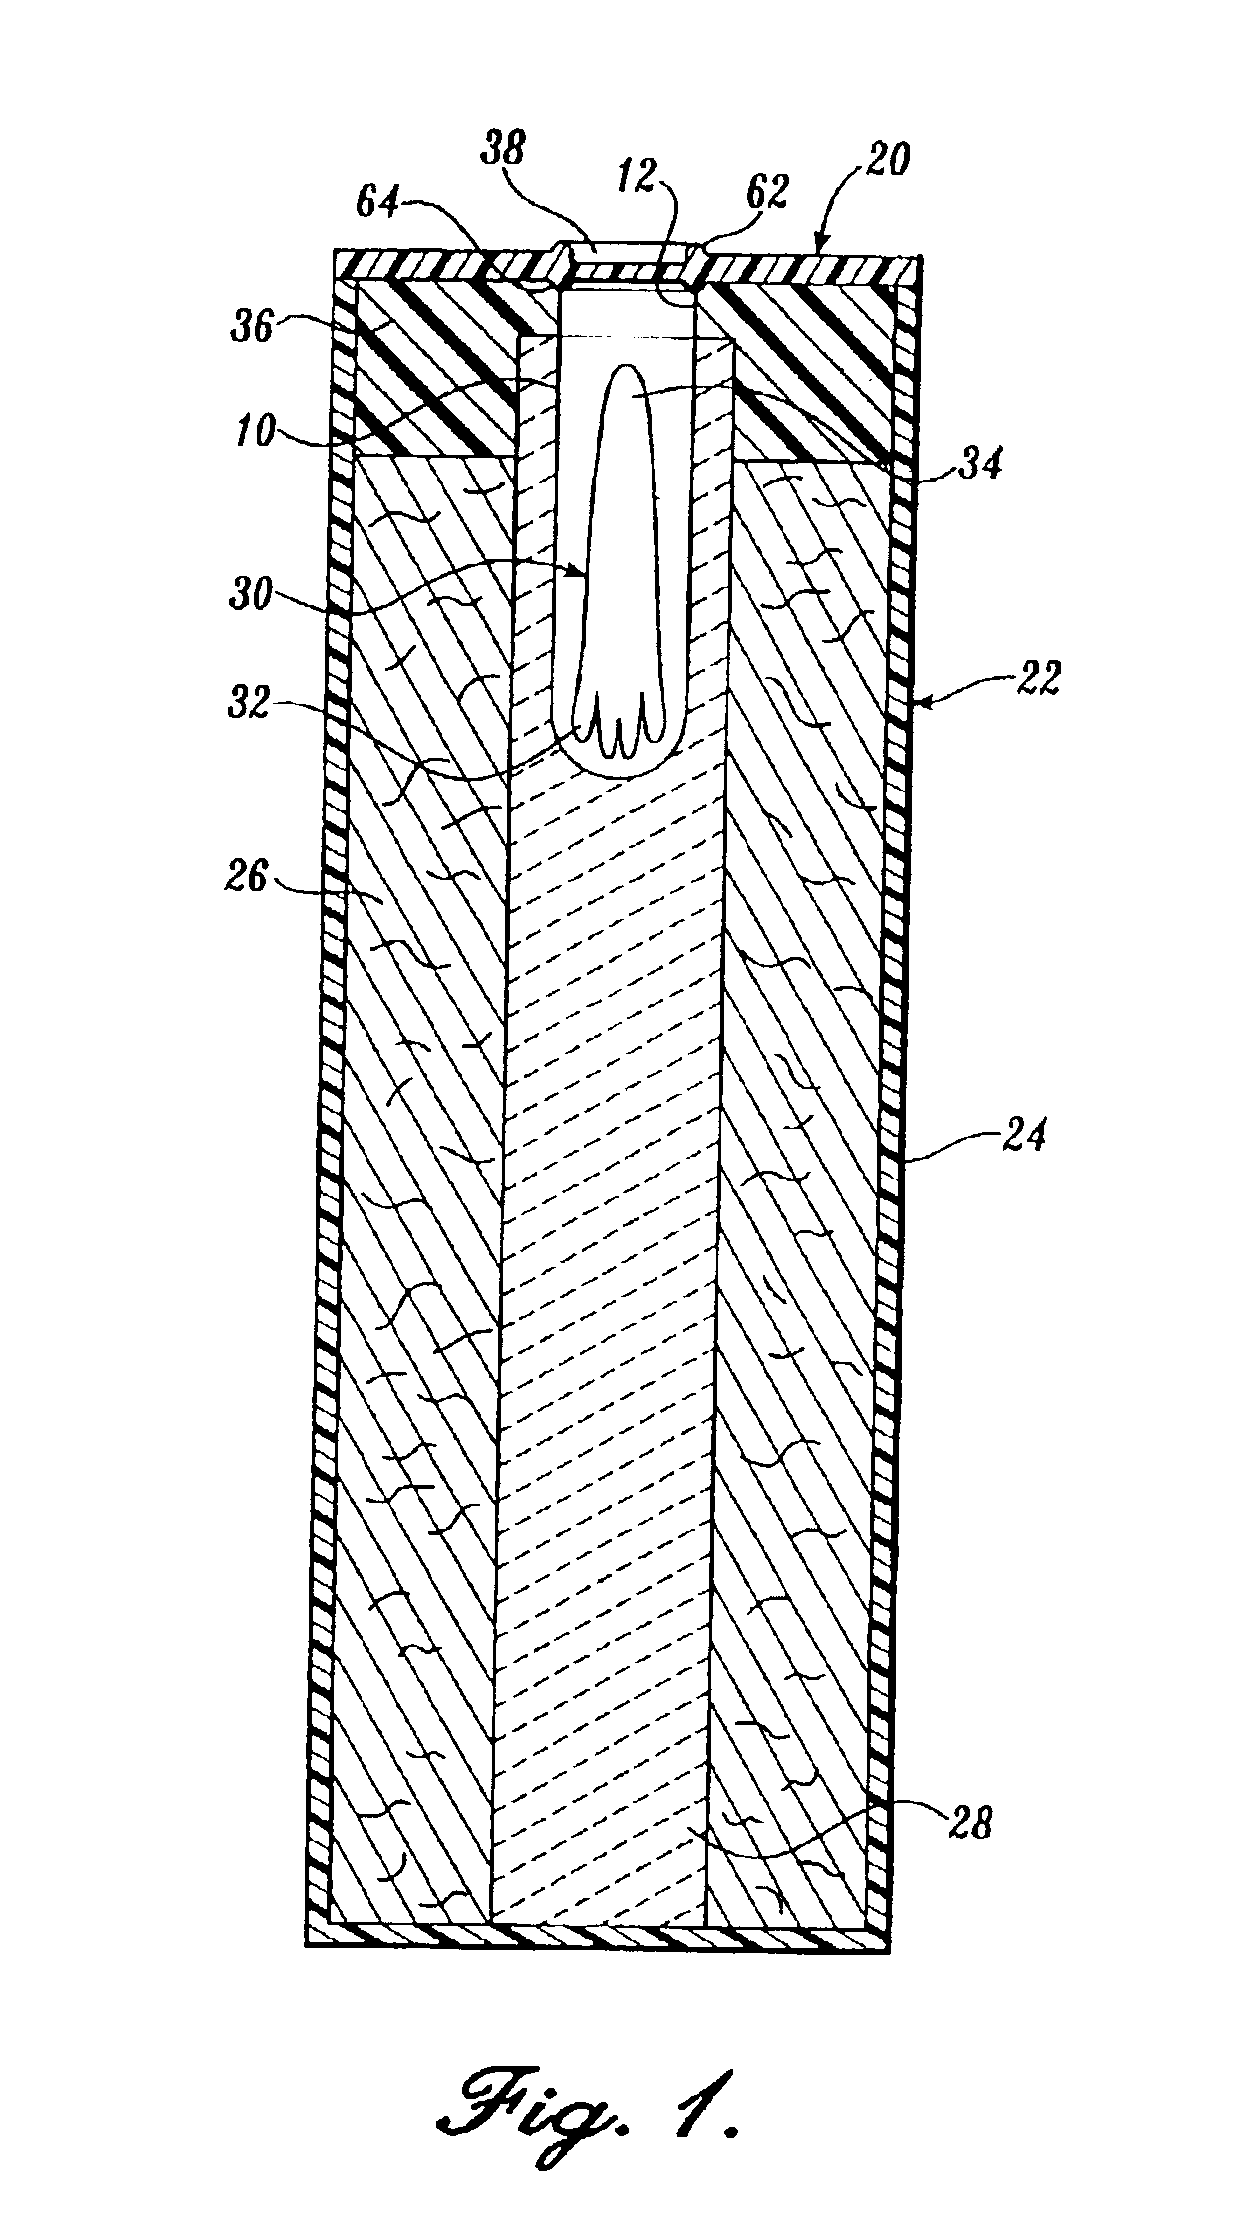 End seal for a manufactured seed and a method of manufacturing and attaching the same